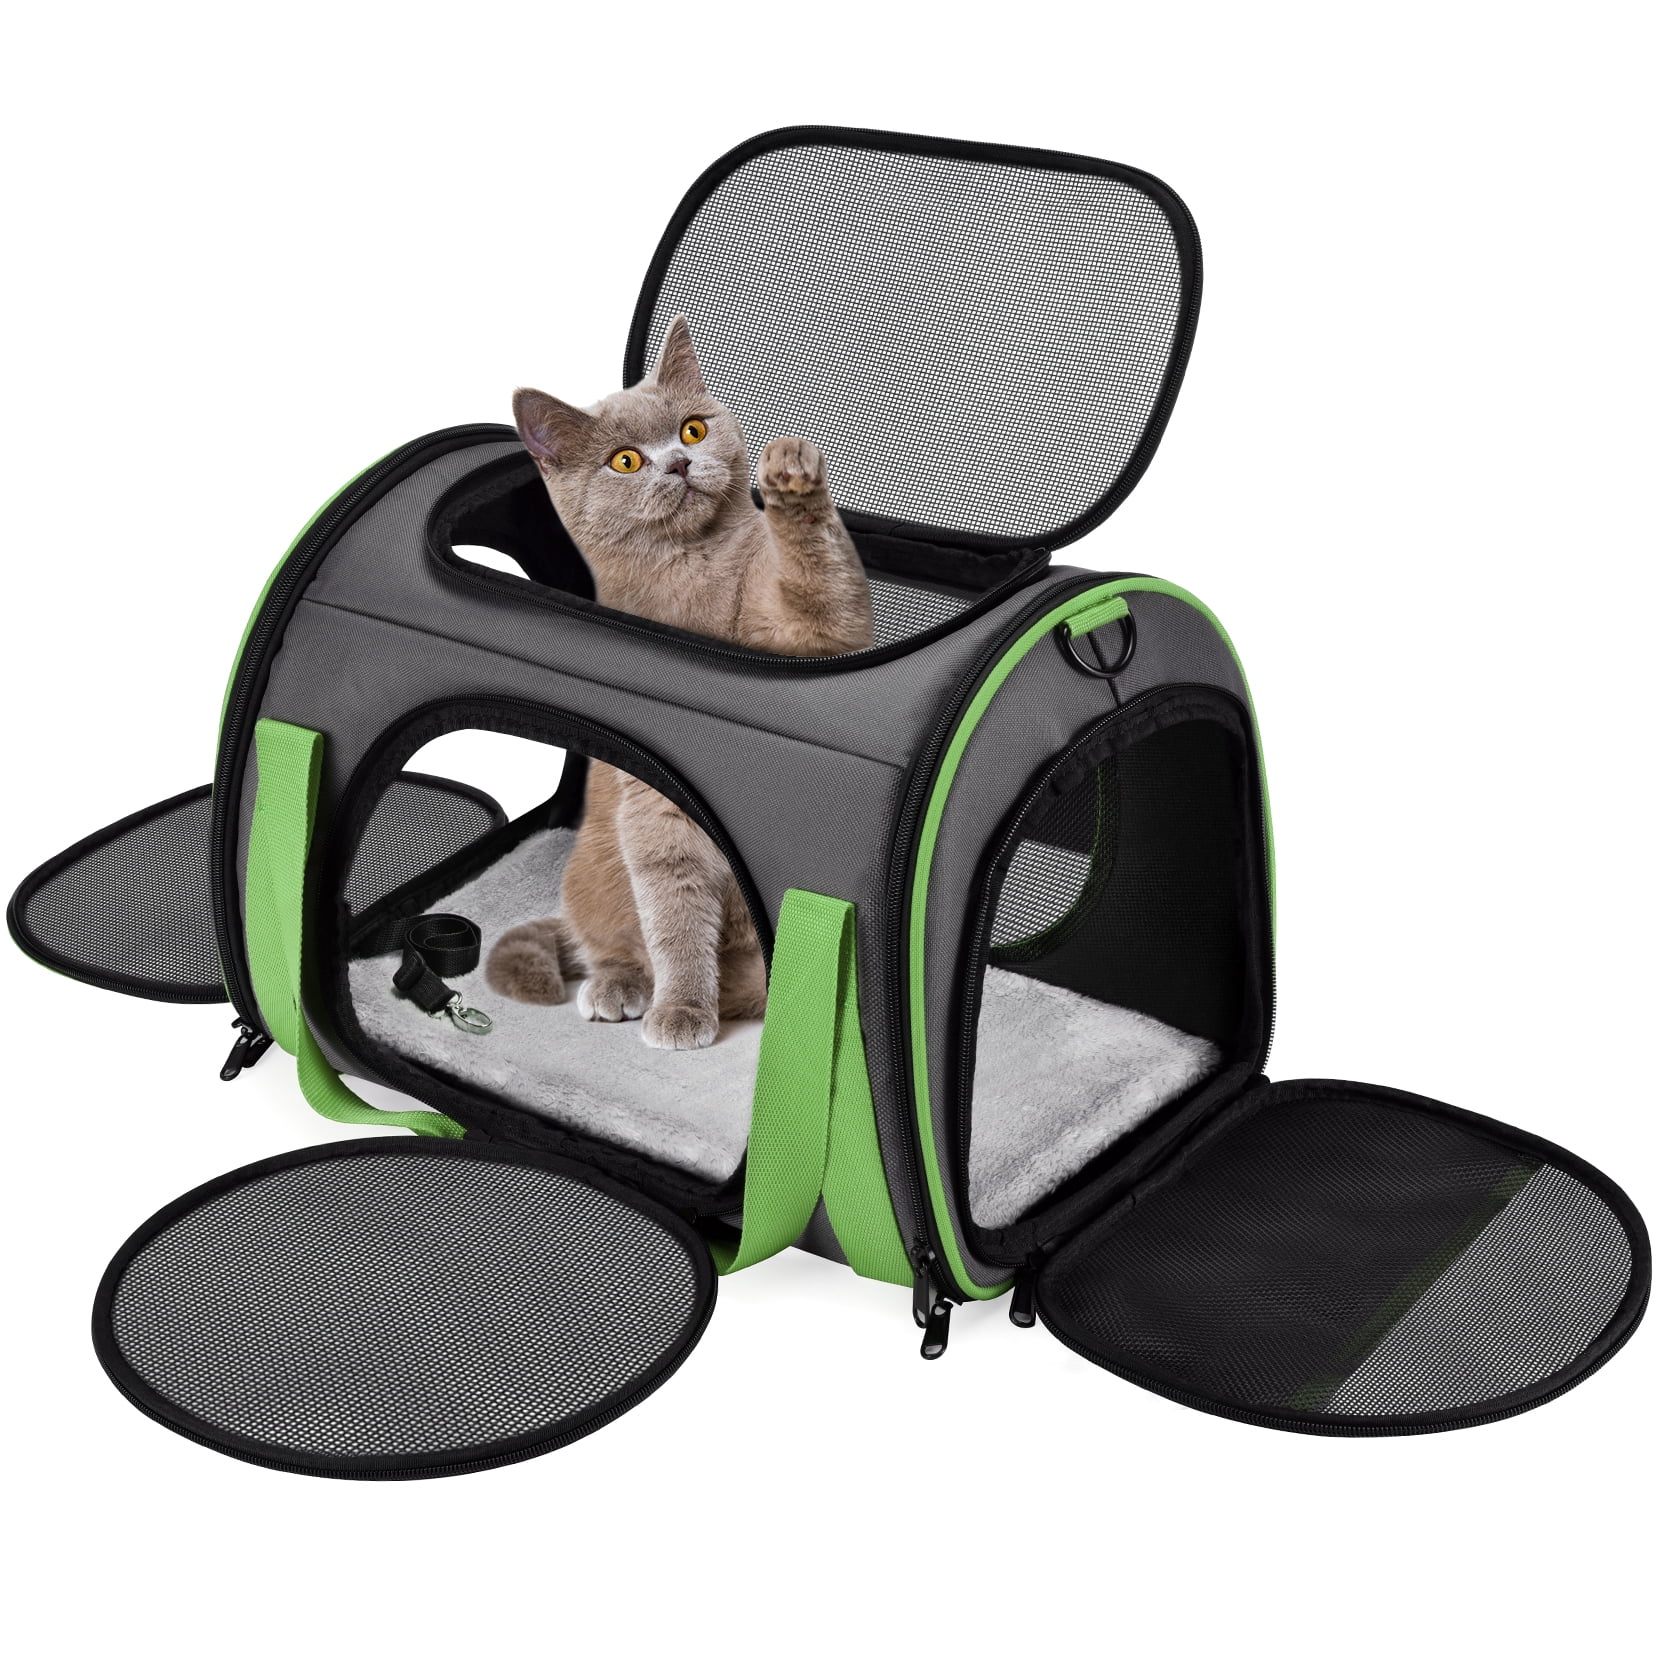 TSA Airline Approved Cat Carrier with Big Space 4 Open Doors for Comfortable Travelling. OKMEE Dog Carrier with Ventilation for Small Medium Cats Dogs Puppies 5 Mesh Windows 